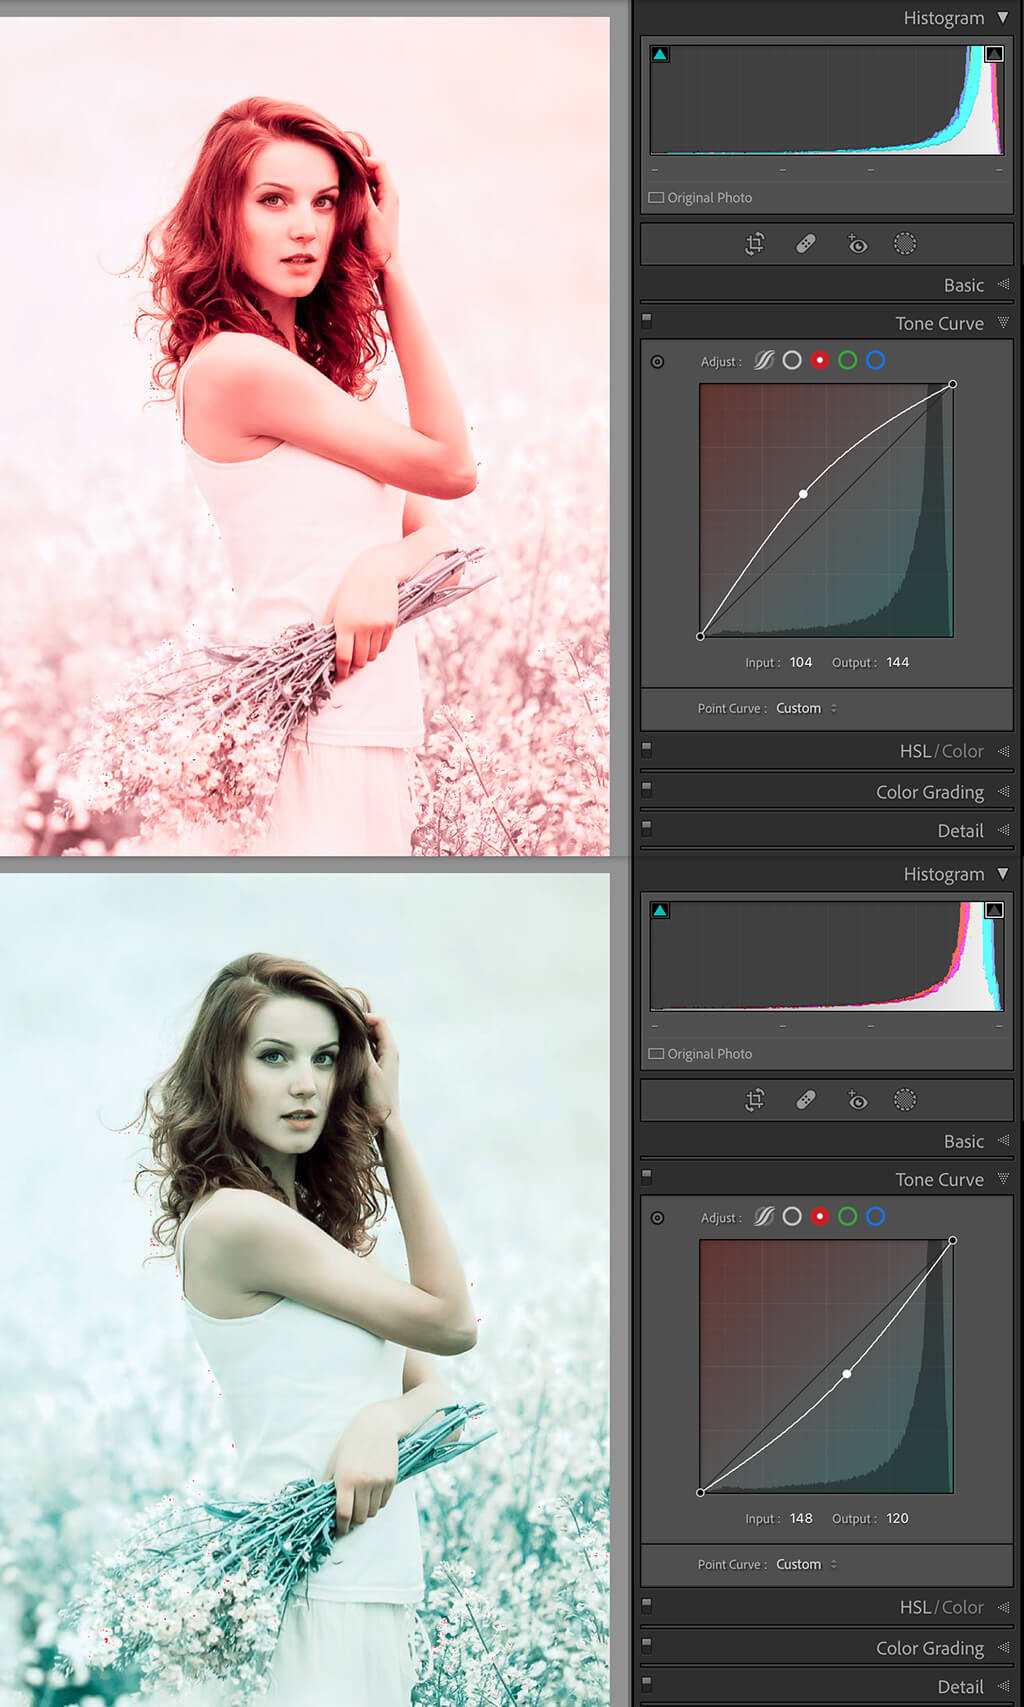 How to Use Point Curve in Lightroom